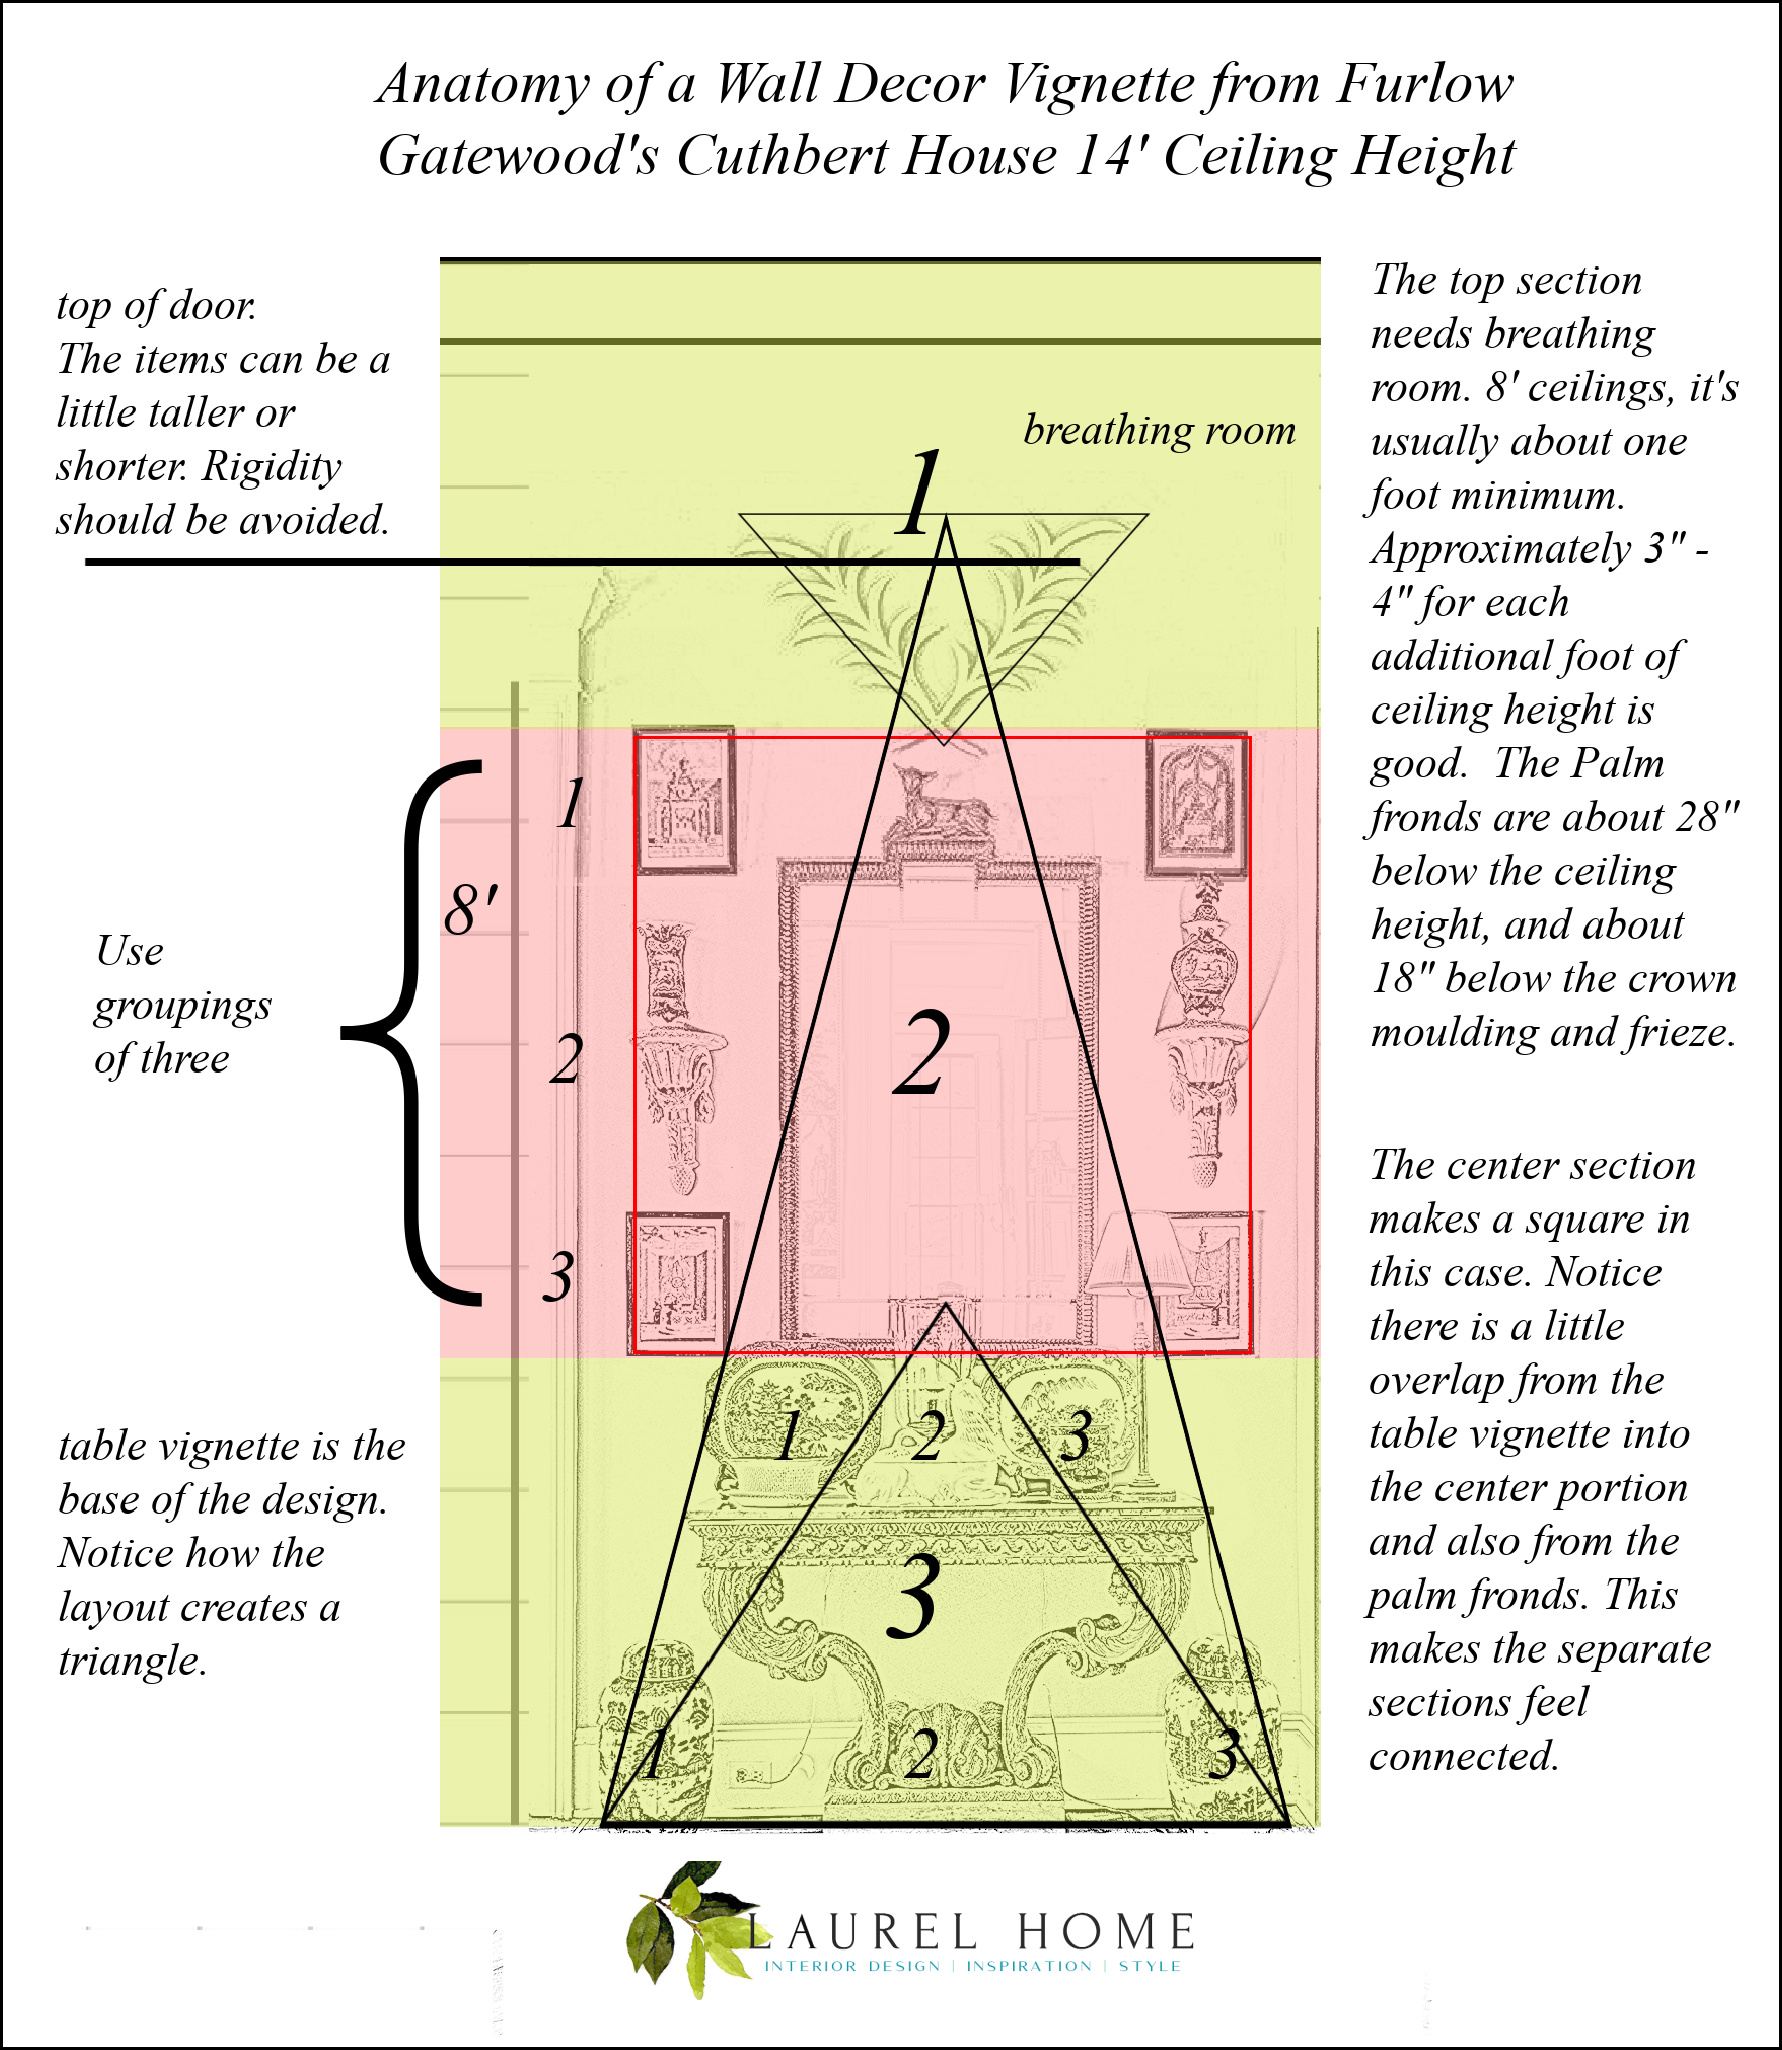 Anatomy of a Wall Decor Vignette from Furlow Gatewood's Cuthbert House 14' ceiling height copy